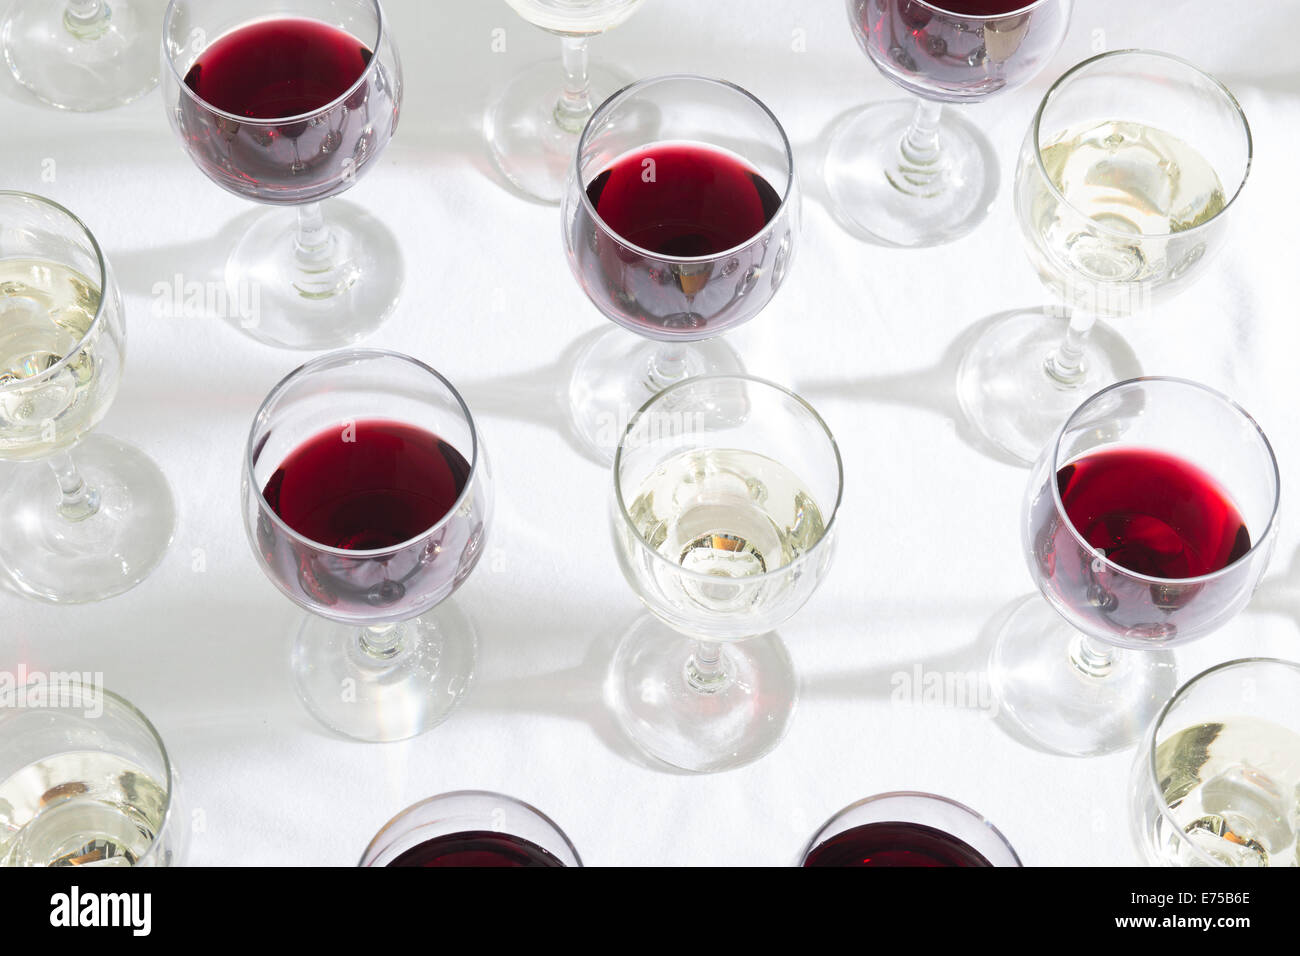 An array of wine glasses filled with different wines. Stock Photo